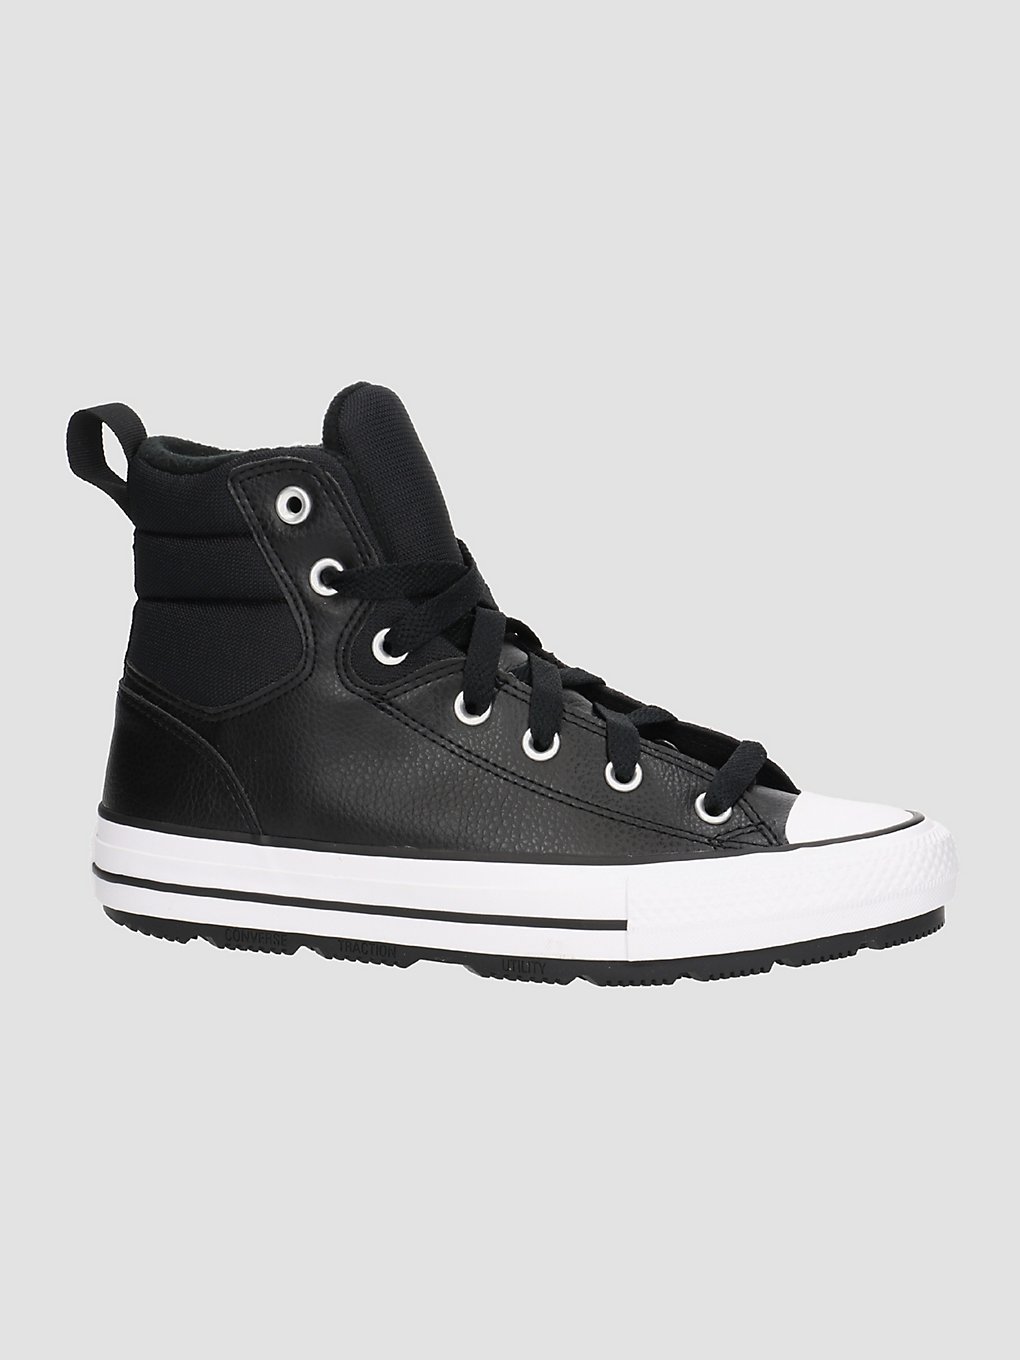 converse chuck taylor all star faux leather berks sho black